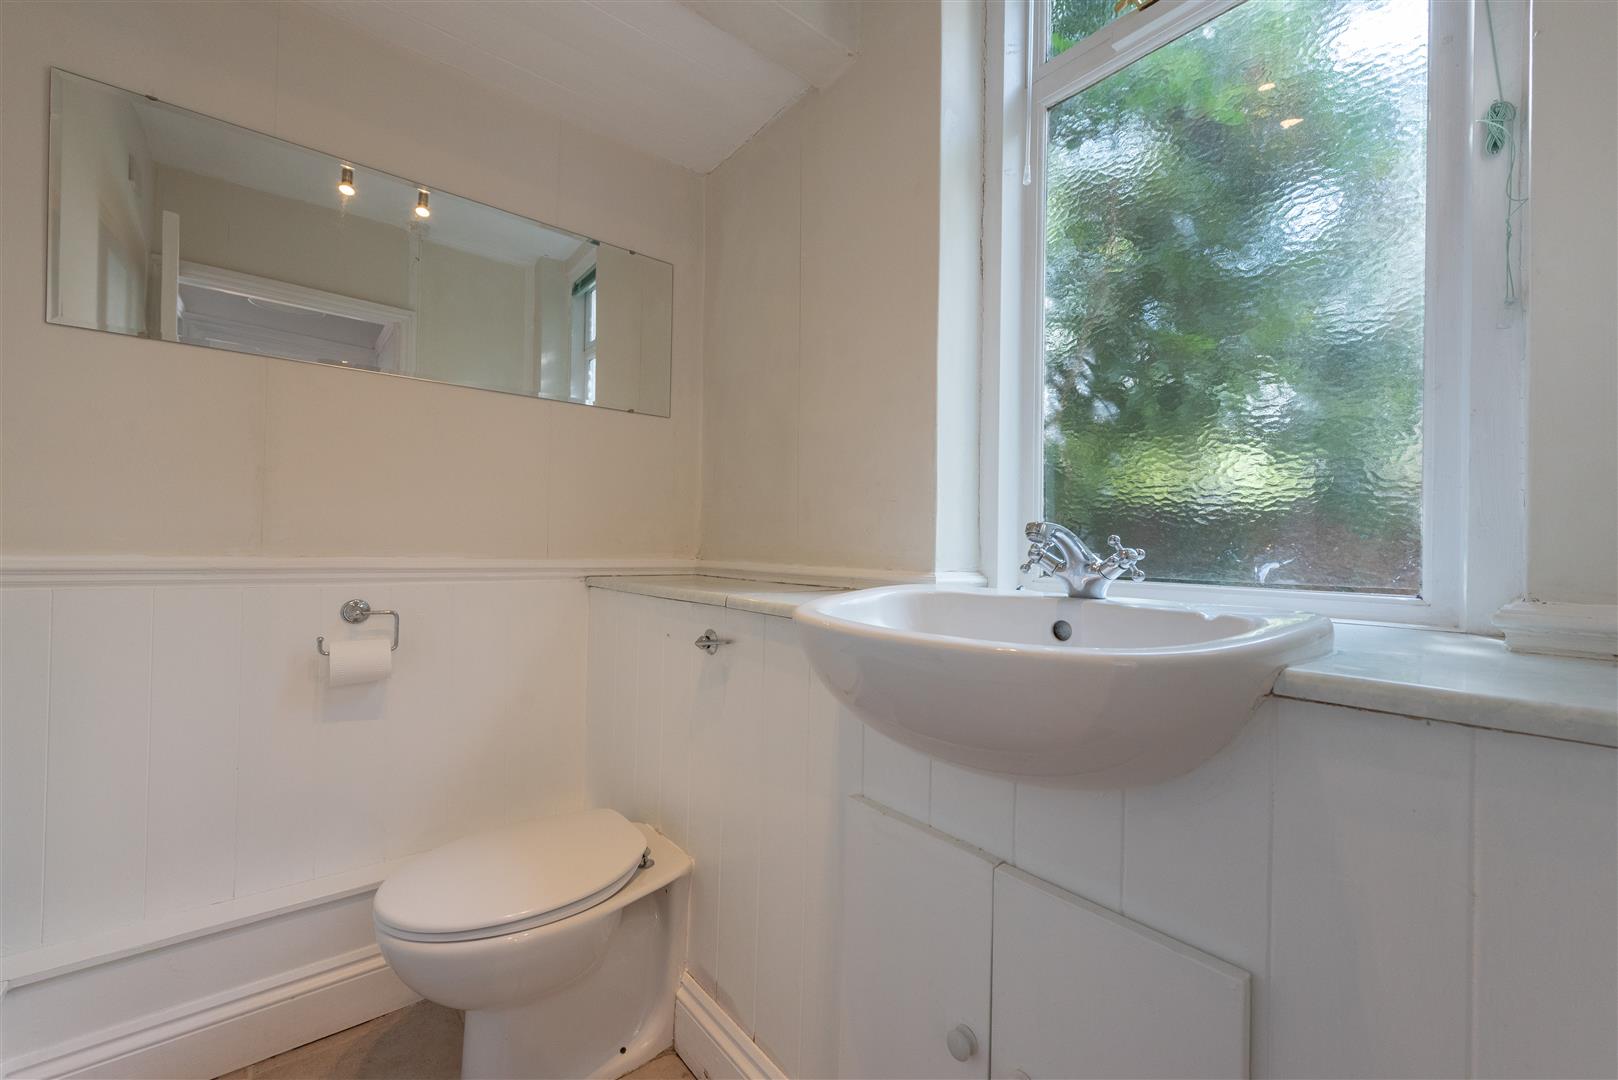 Inside view of a house bathroom along with a basin